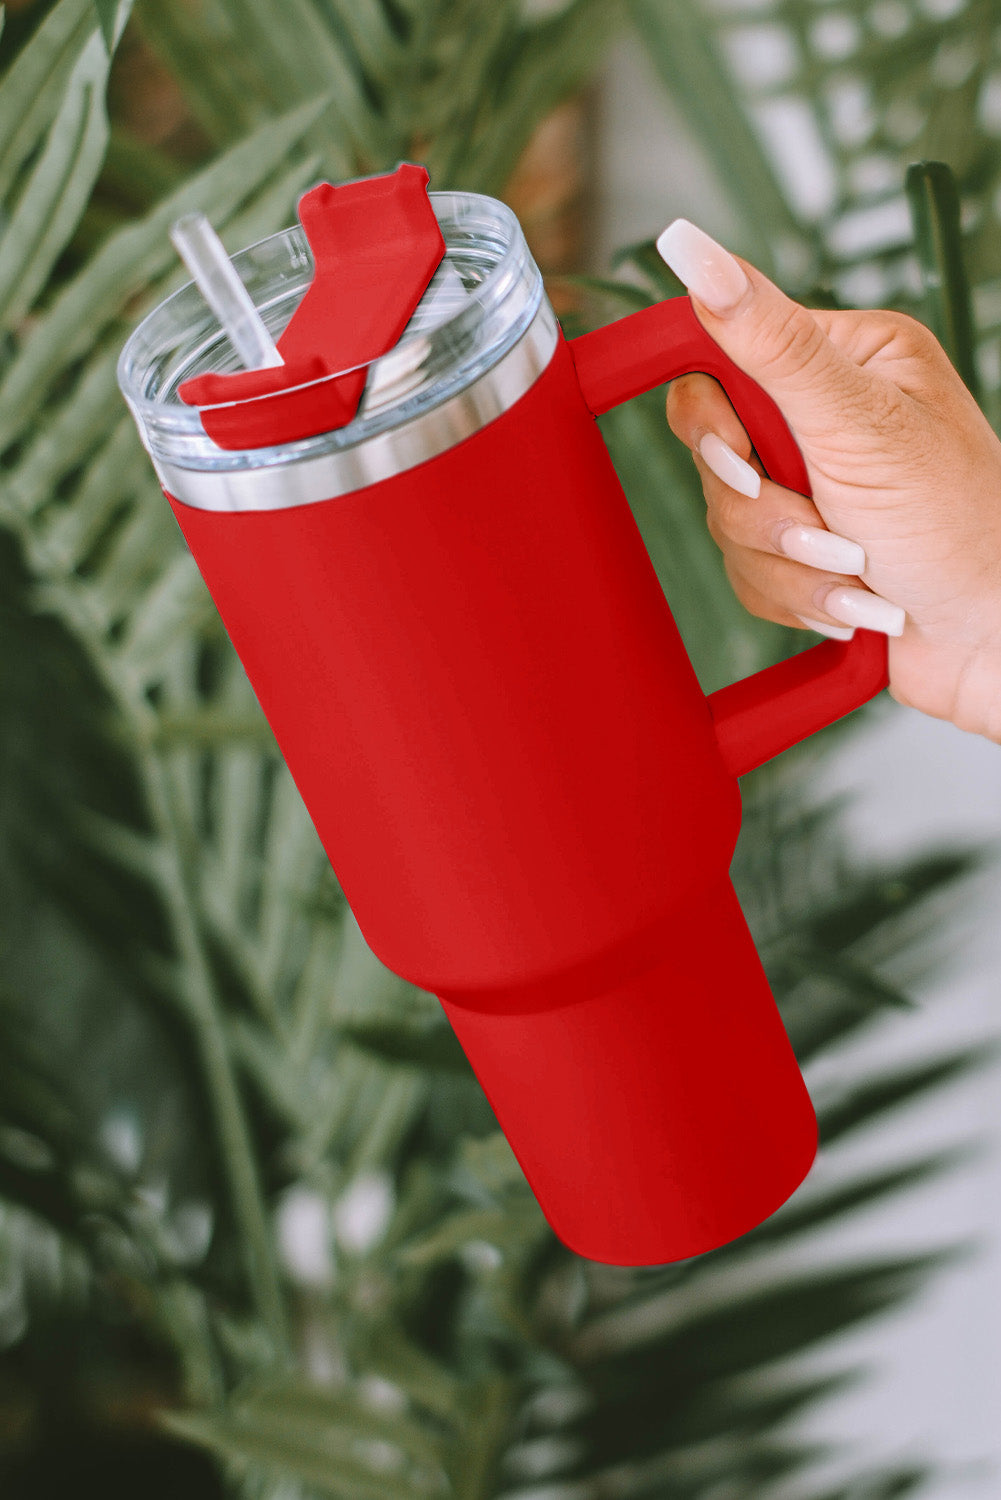 Fiery Red 304 Stainless Steel Double Insulated Cup 40oz